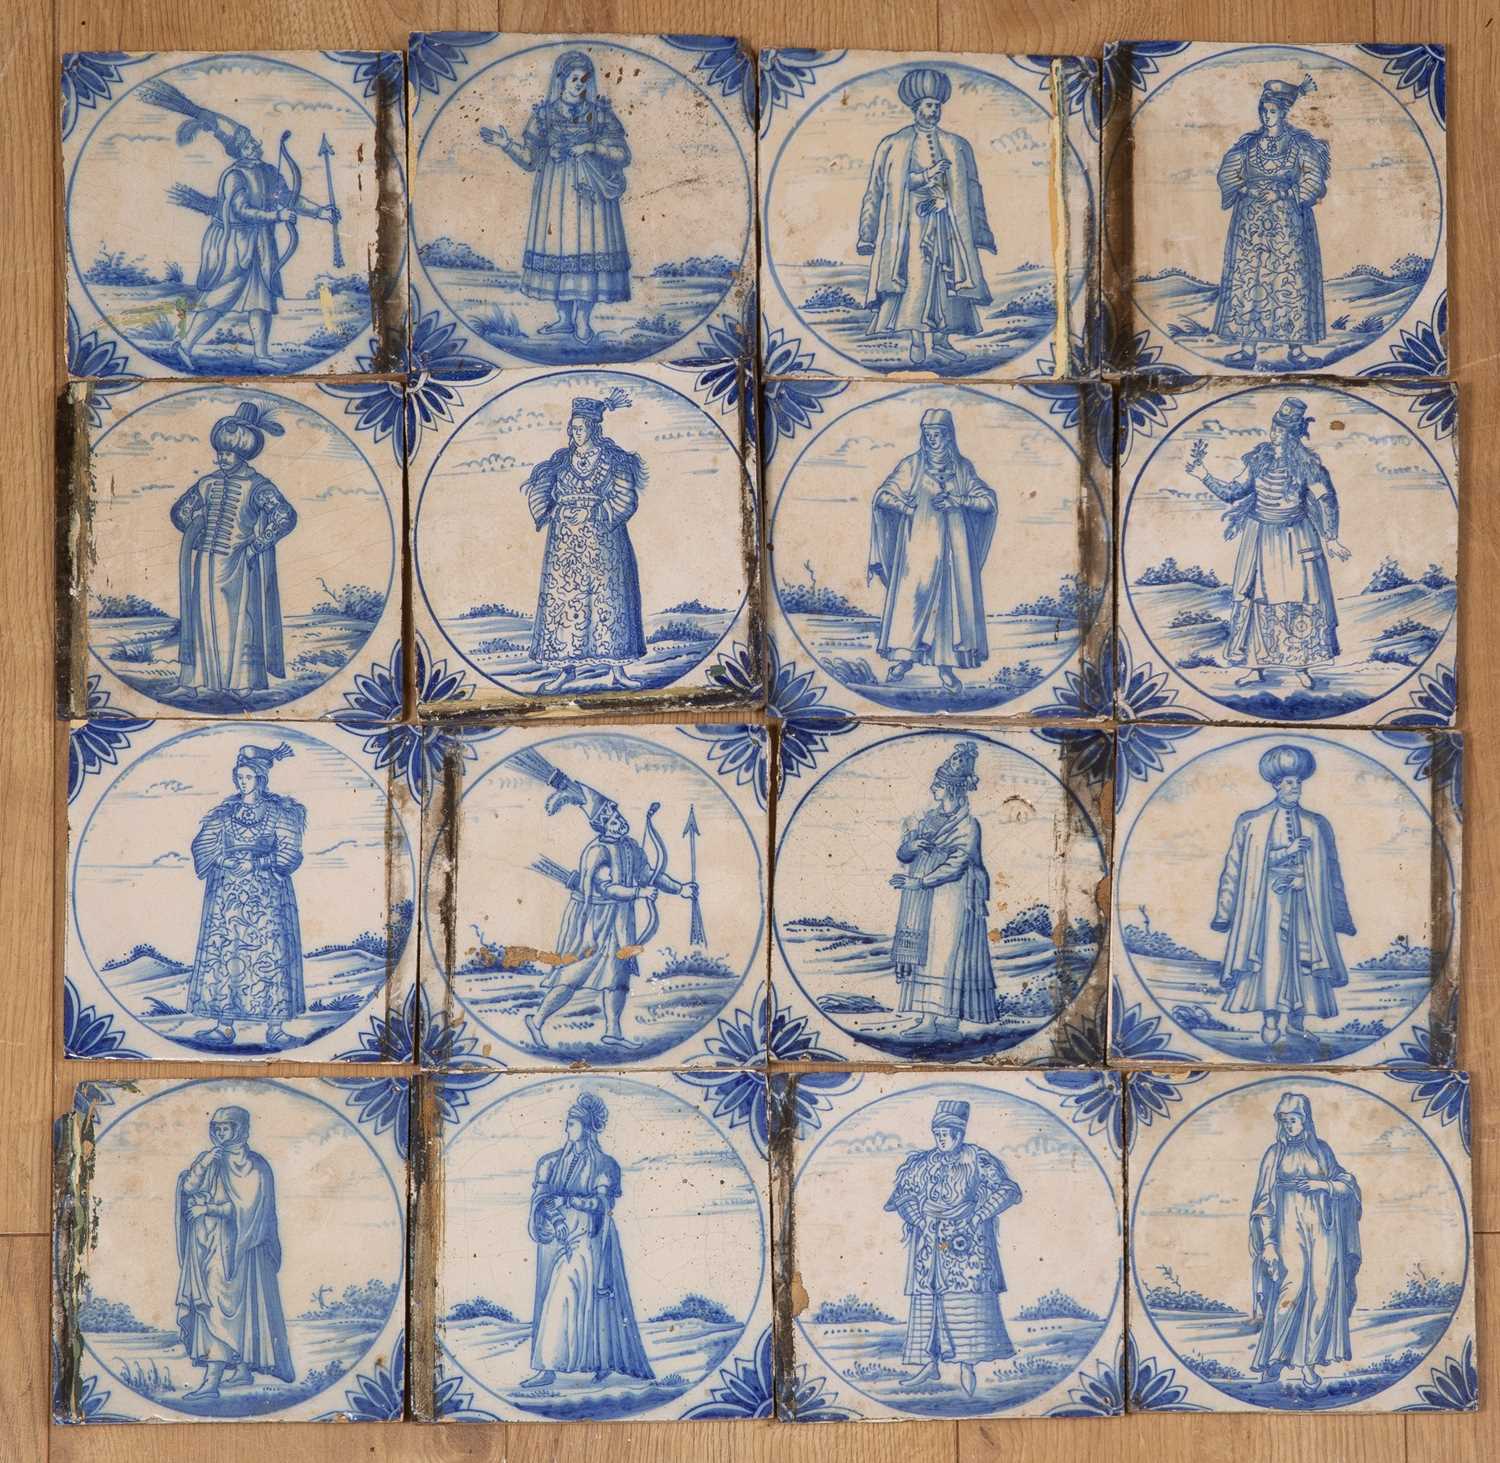 Lot 175 - A collection of 18th or 19th century Delftware tiles